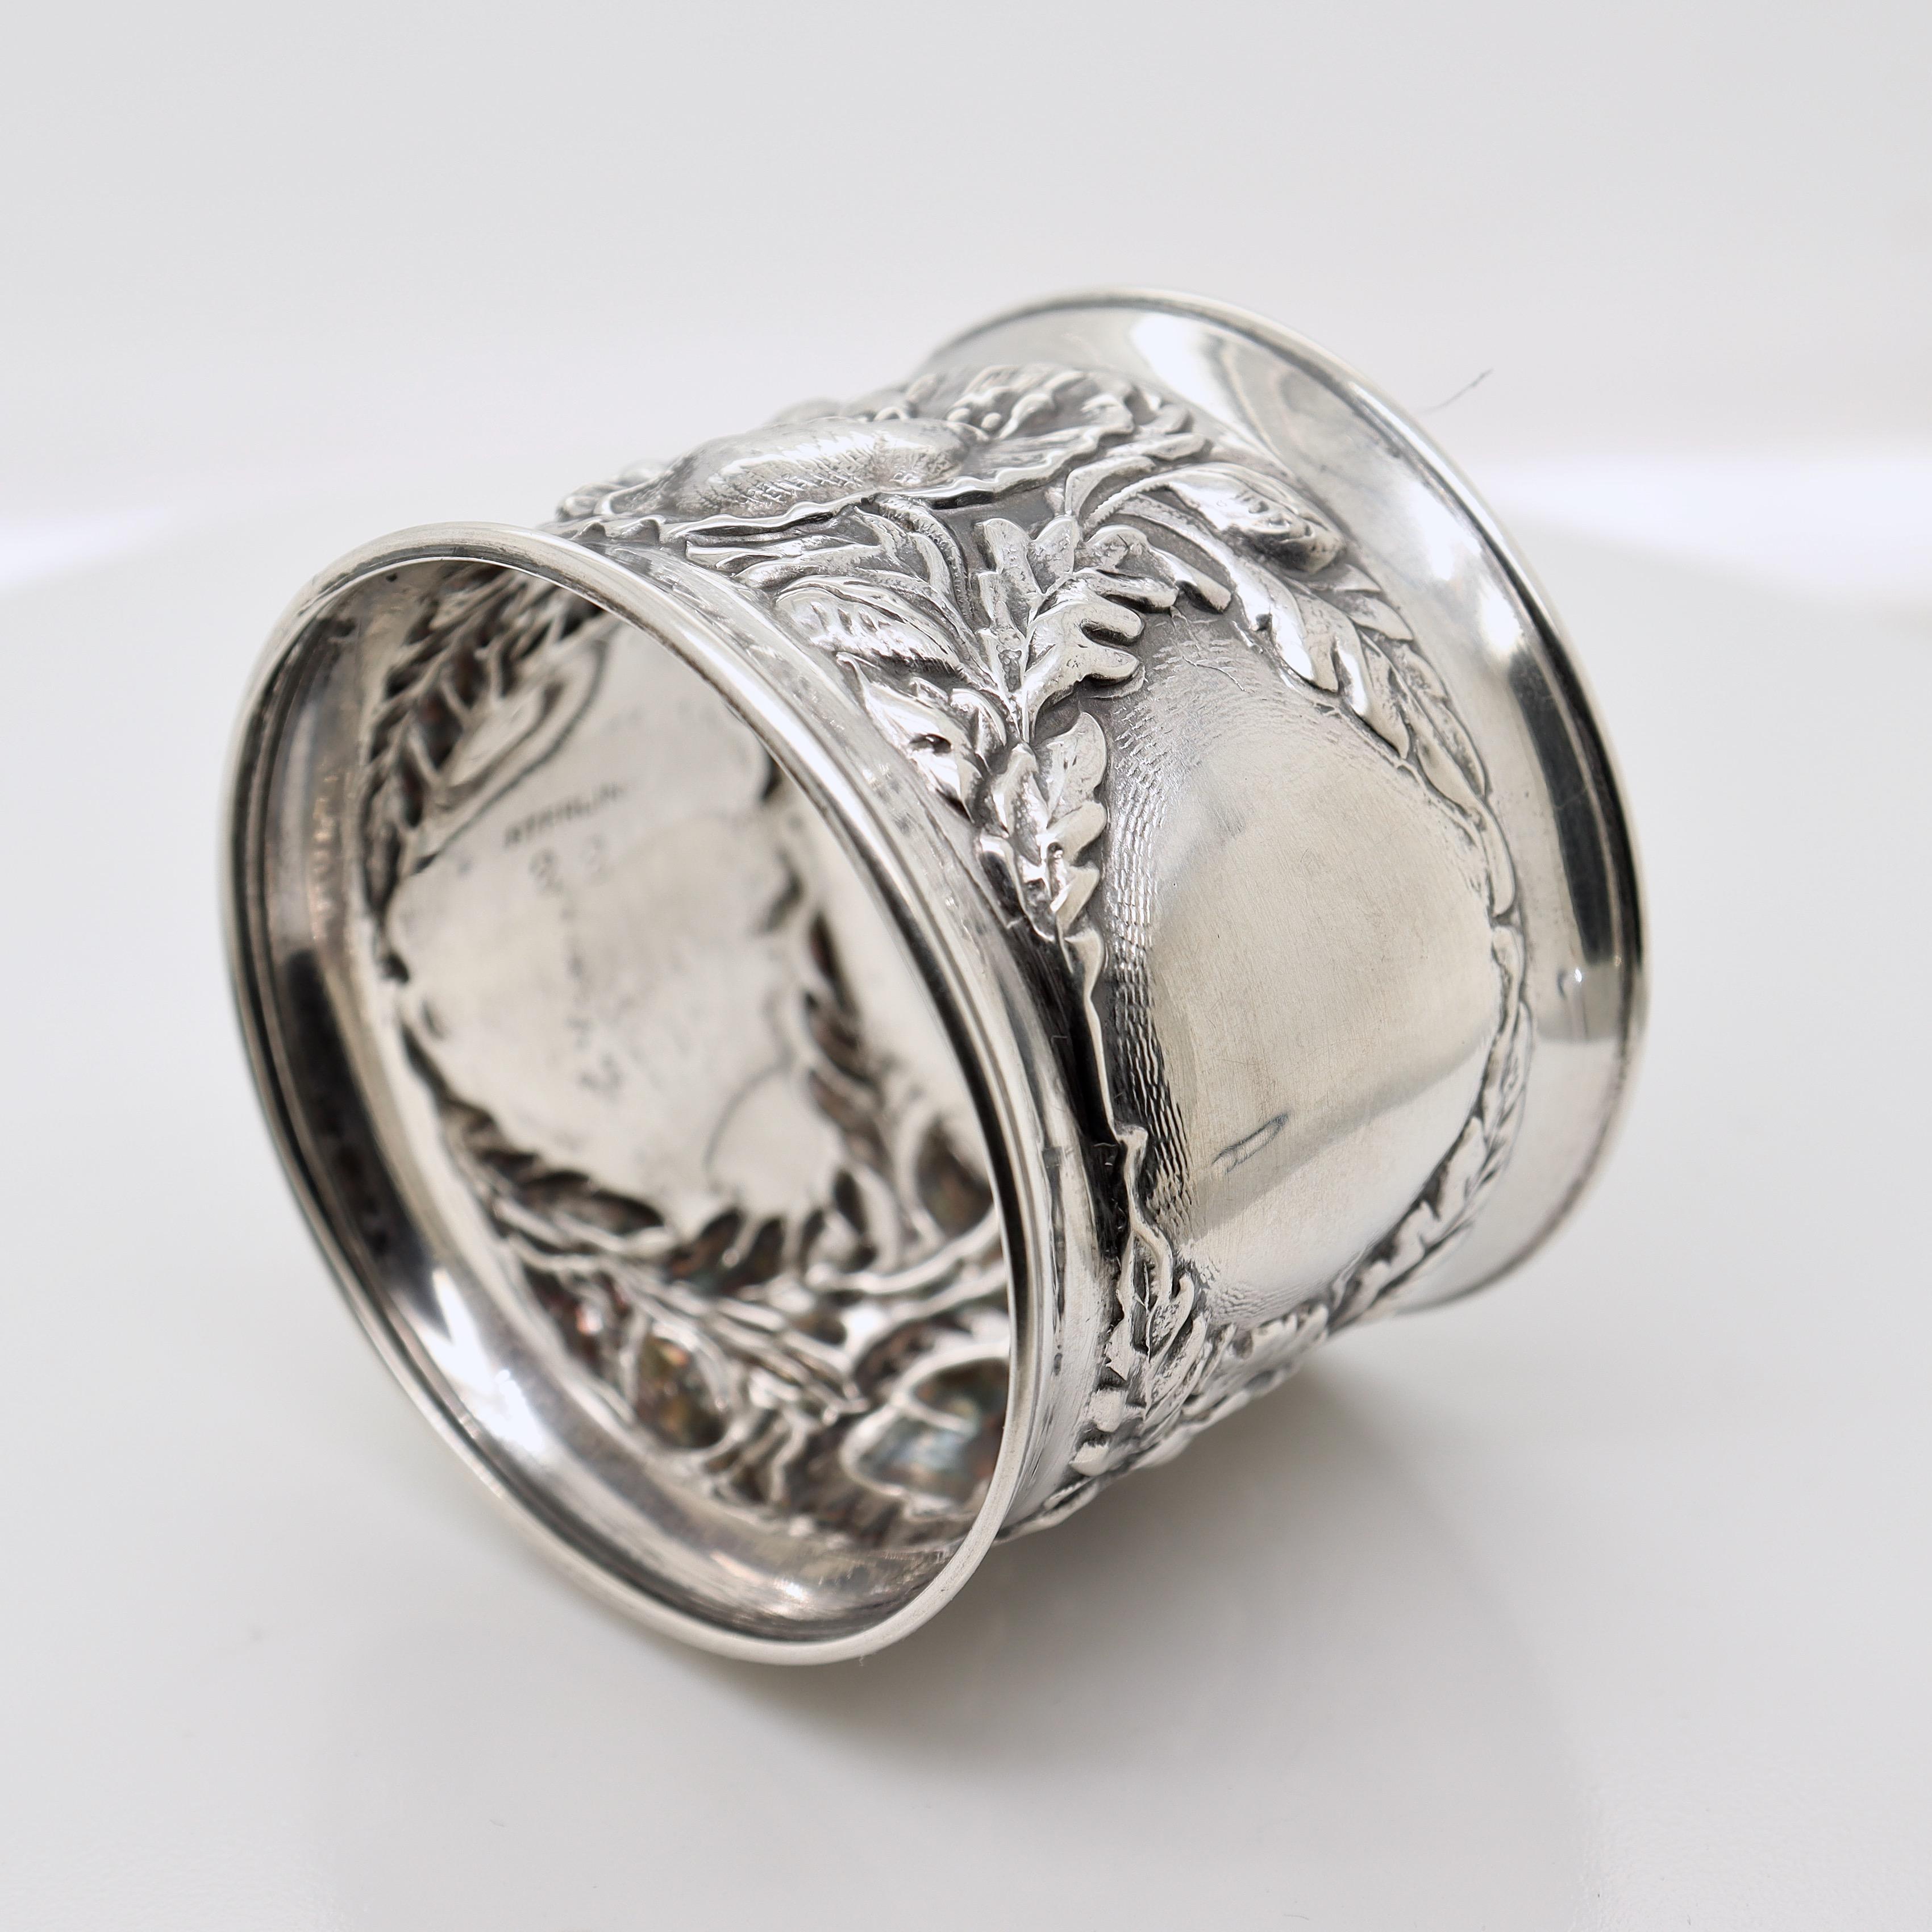 Antique Art Nouveau Sterling Silver Napkin Ring with Poppy Flowers For Sale 5